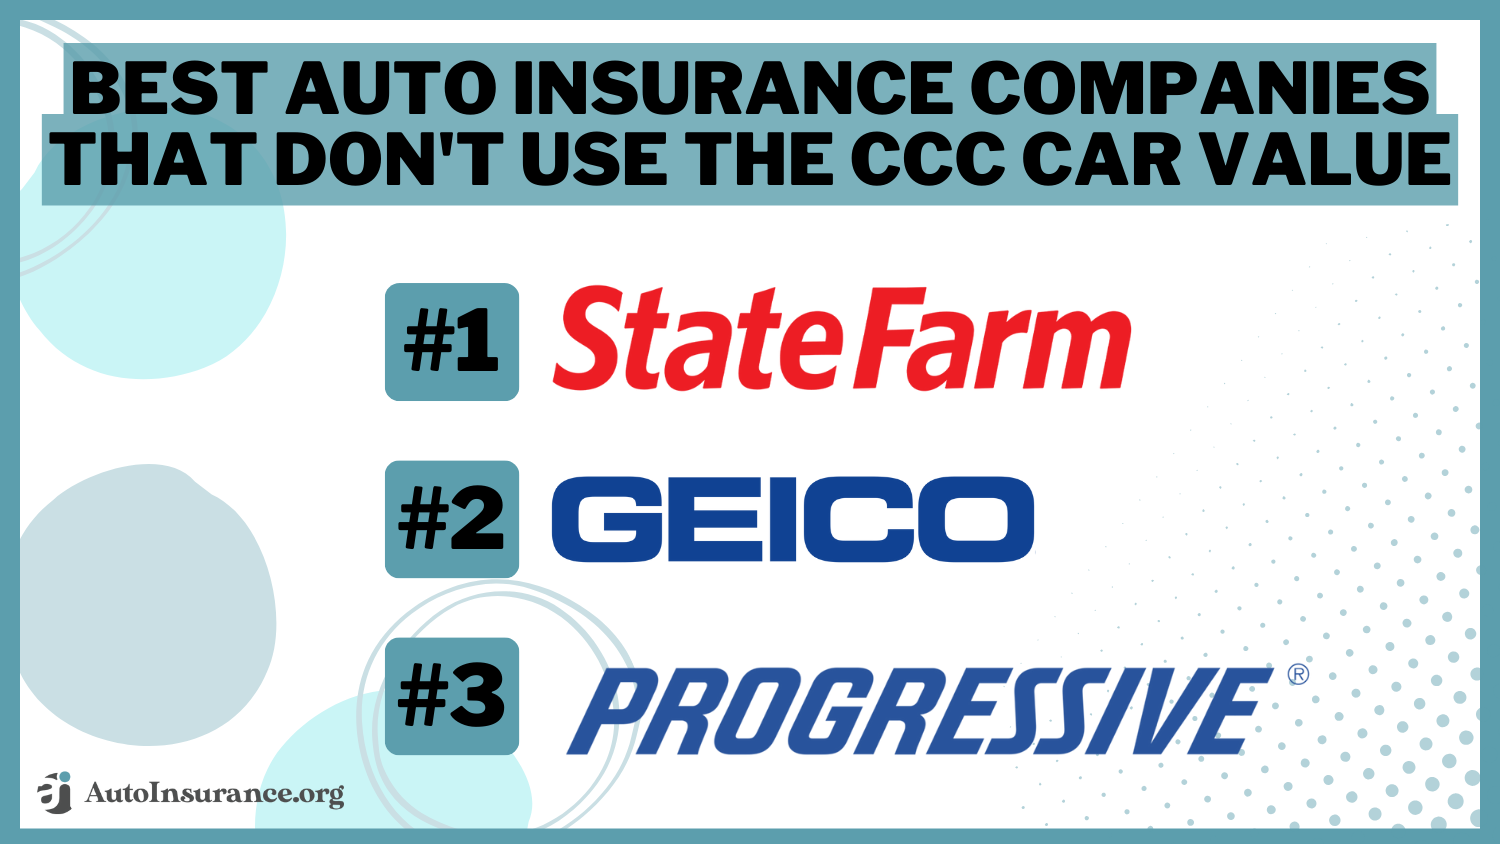 Best Auto Insurance Companies That Don’t Use the CCC Car Value: State Farm, Geico, and Progressive